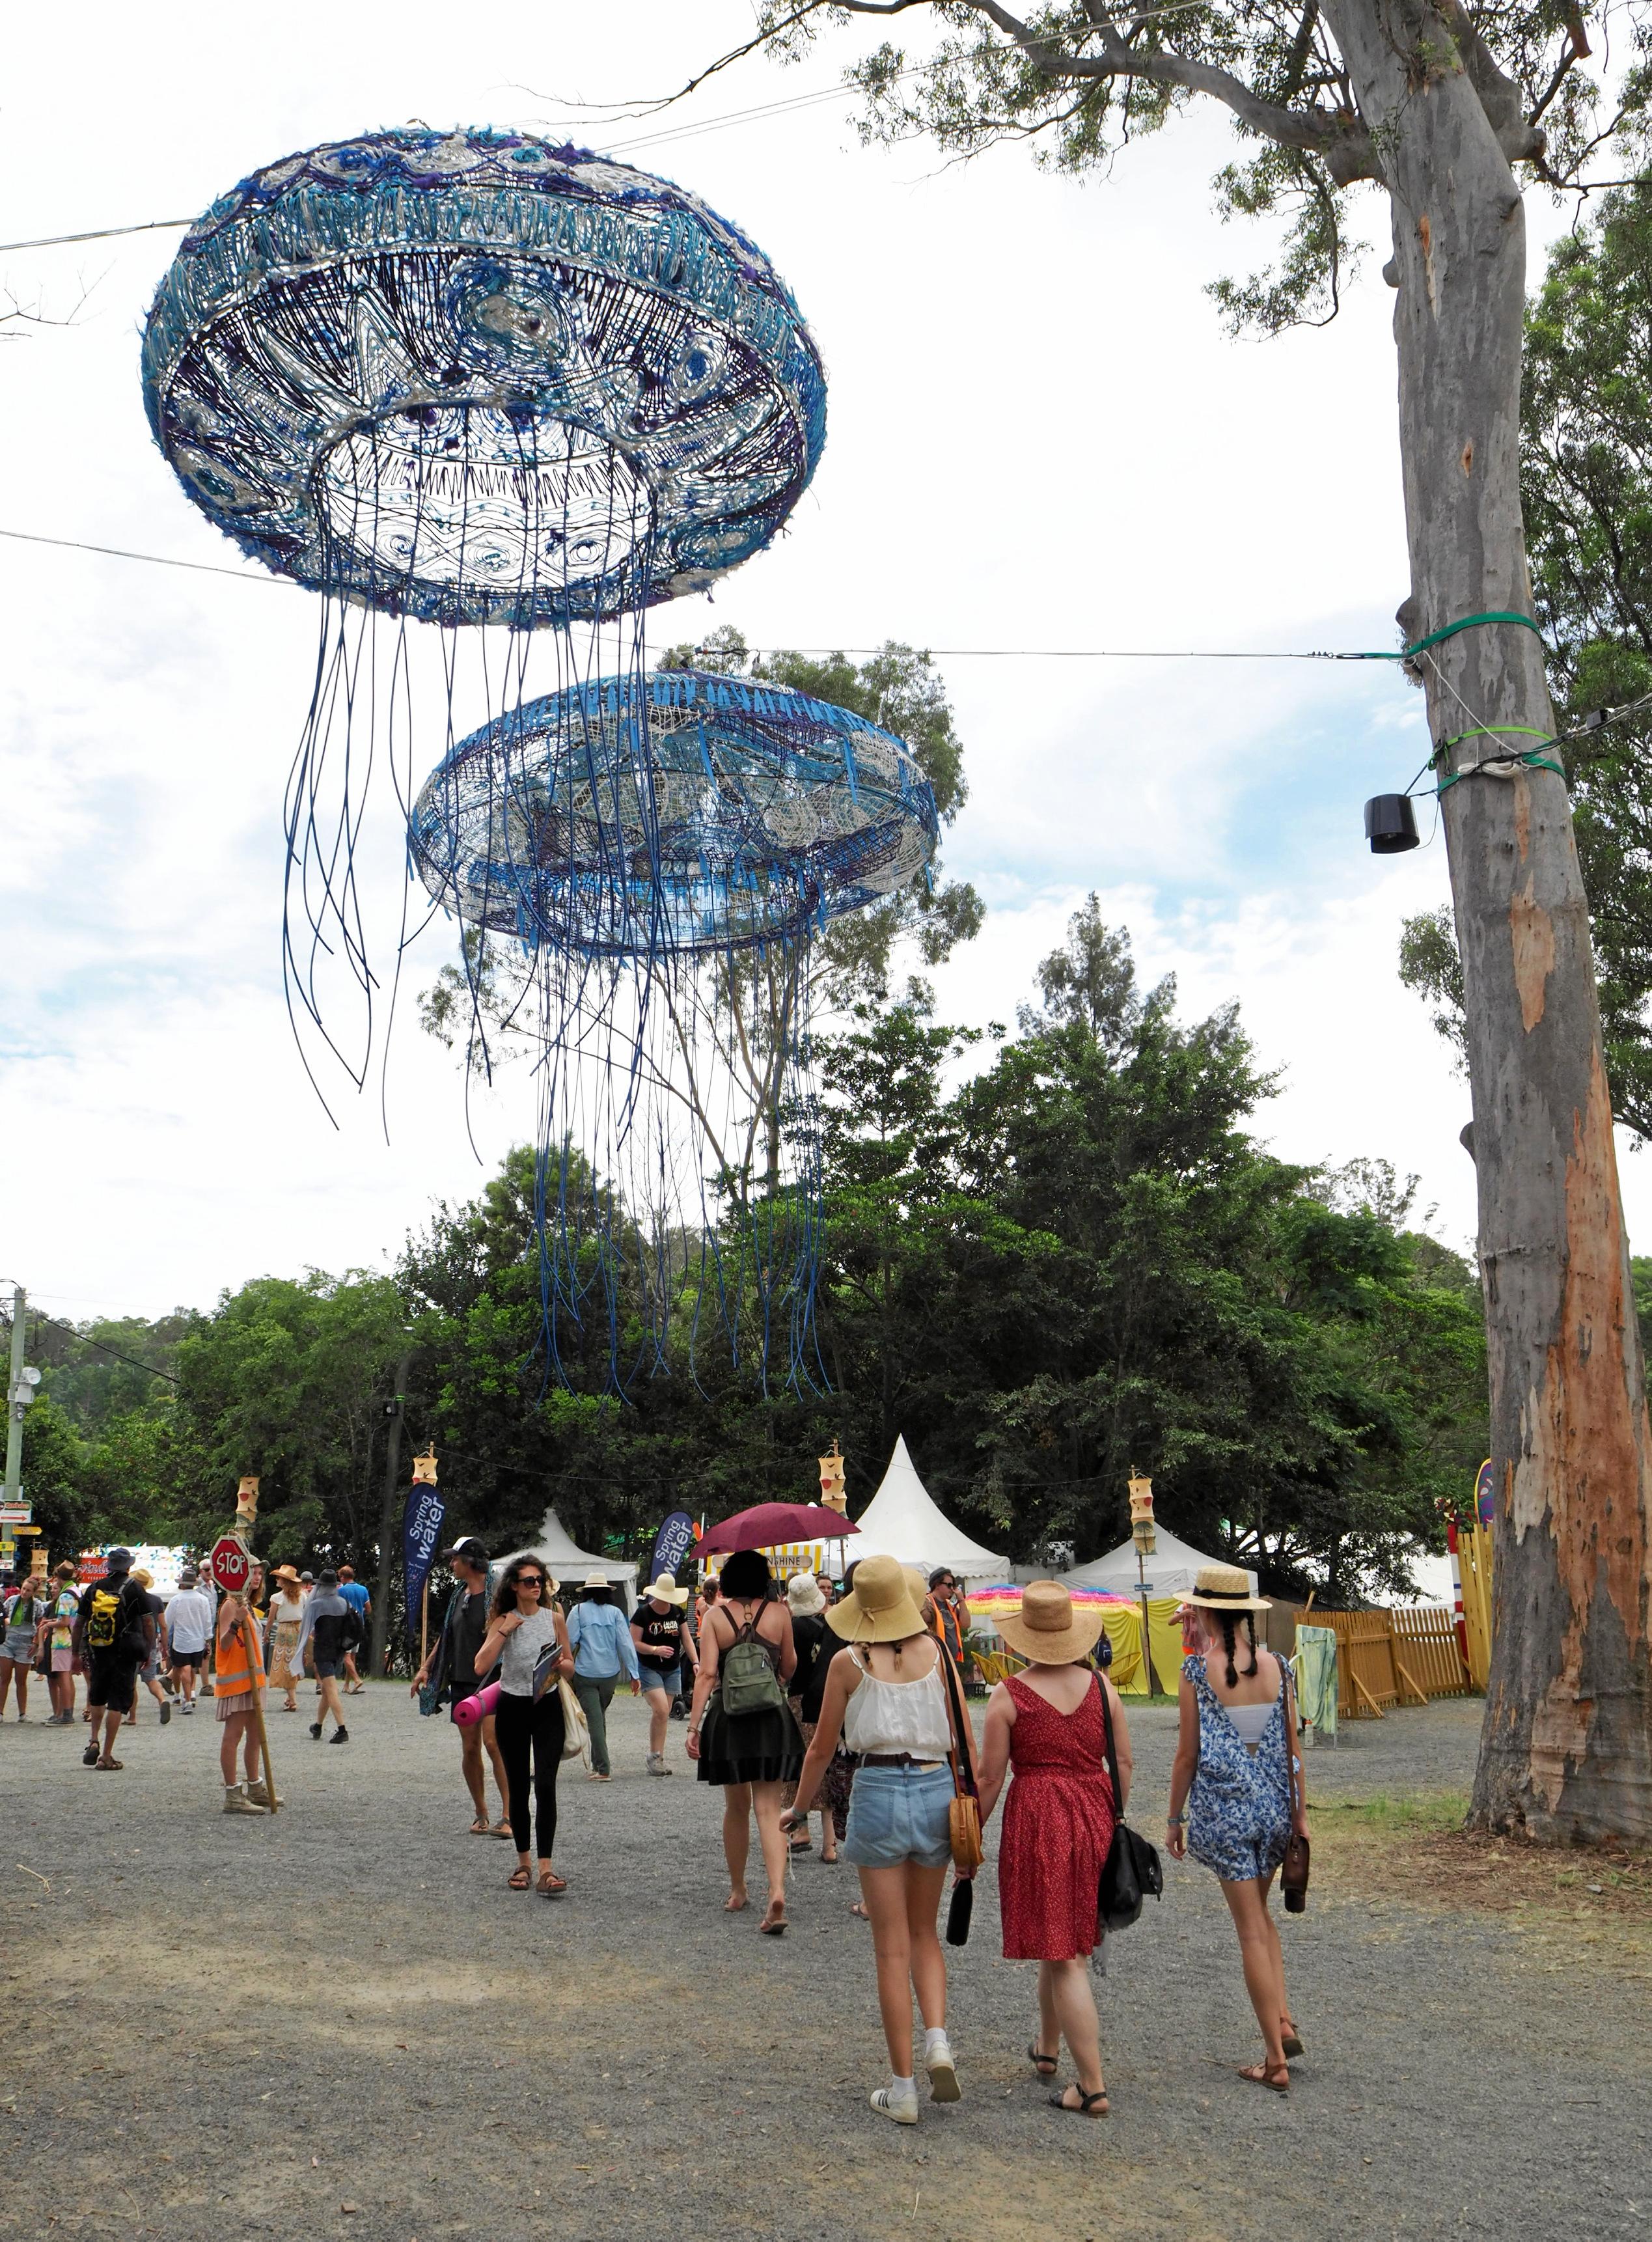 Giant jellyfish lanterns greet festival goers at the main entrance to the Woodford Folk Festival.